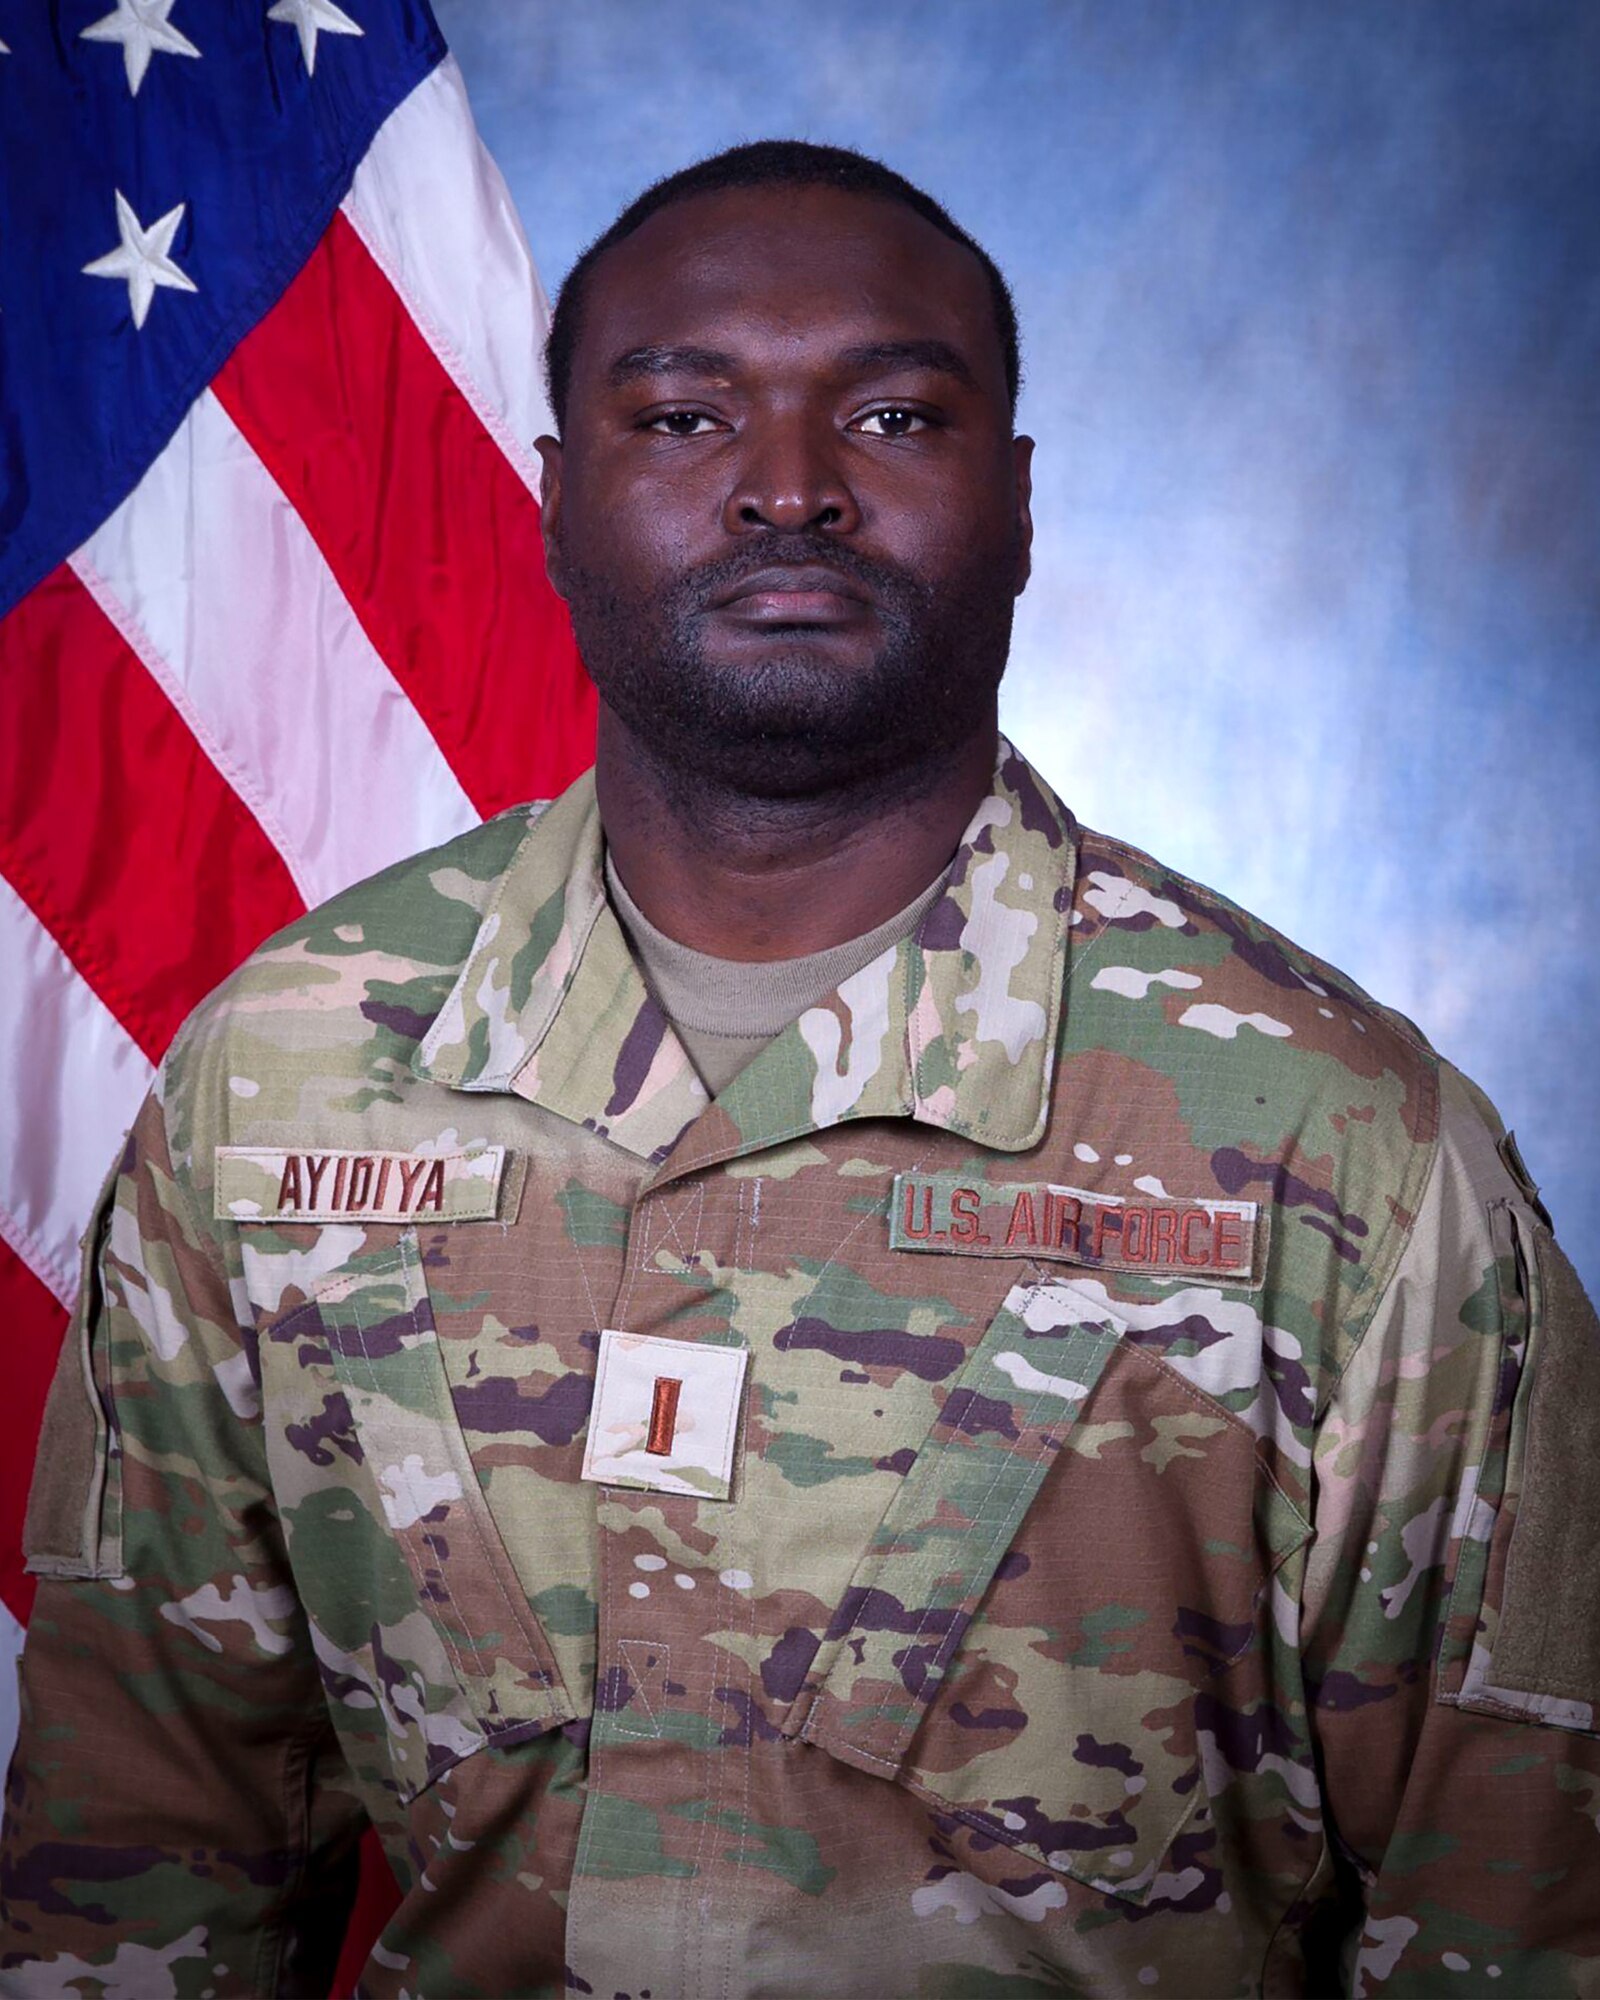 Combat Medic Specialist Maurice Ayidiya served in Operation Iraqi Freedom, with the Wisconsin National Guard, 1st Battalion, 128th Infantry Regiment. Ayidiya was deployed from 2003 to 2004 and gained his U.S. citizenship through his service. Today he is a Cyber Warfare Officer with the 131st Bomb Wing, Missouri Air National Guard. (Courtesy photo)